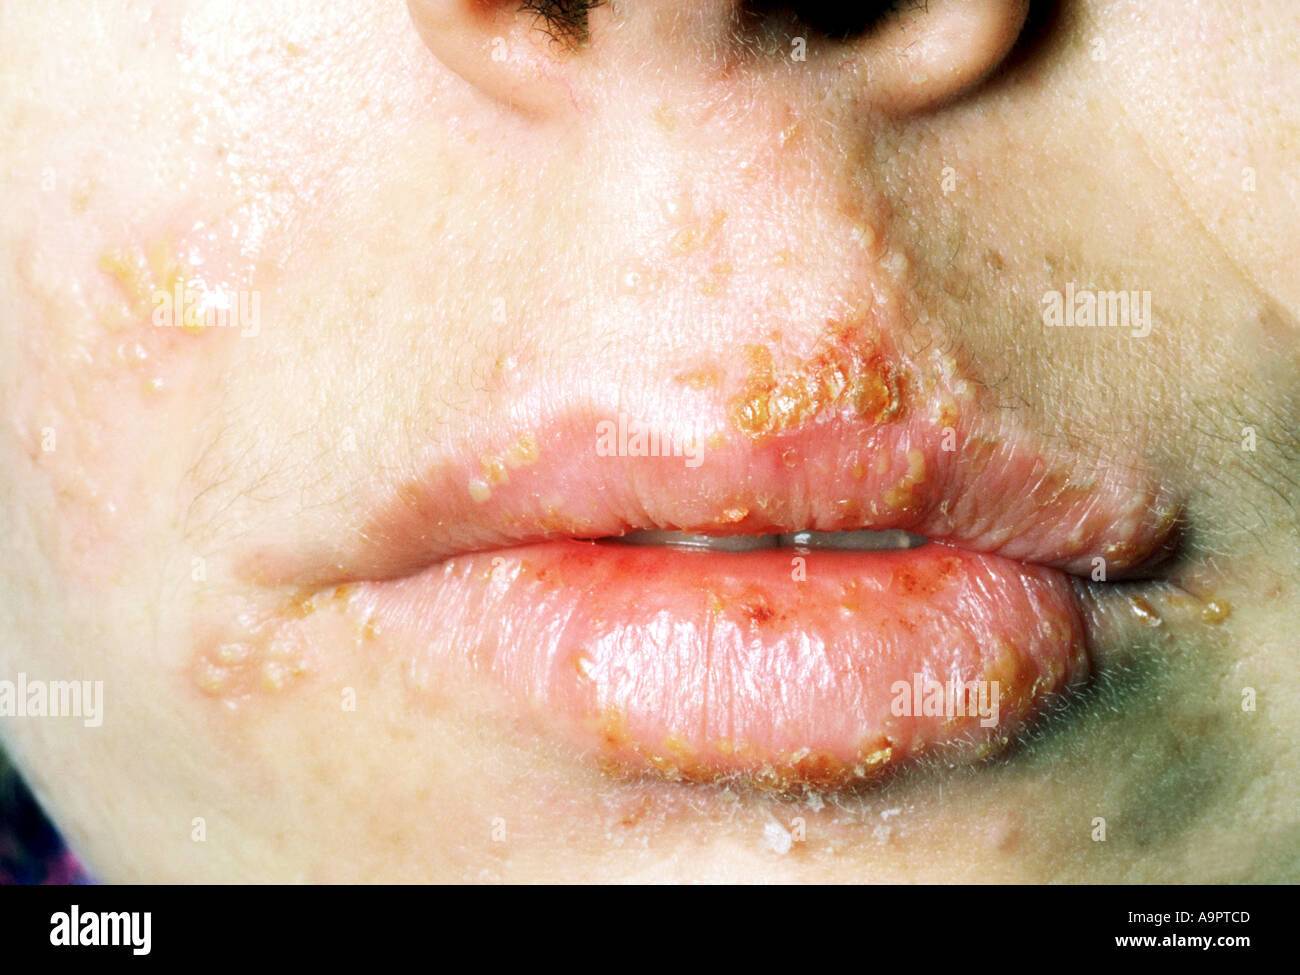 Herpes simplex cold sores on lips and face Stock Photo - Alamy